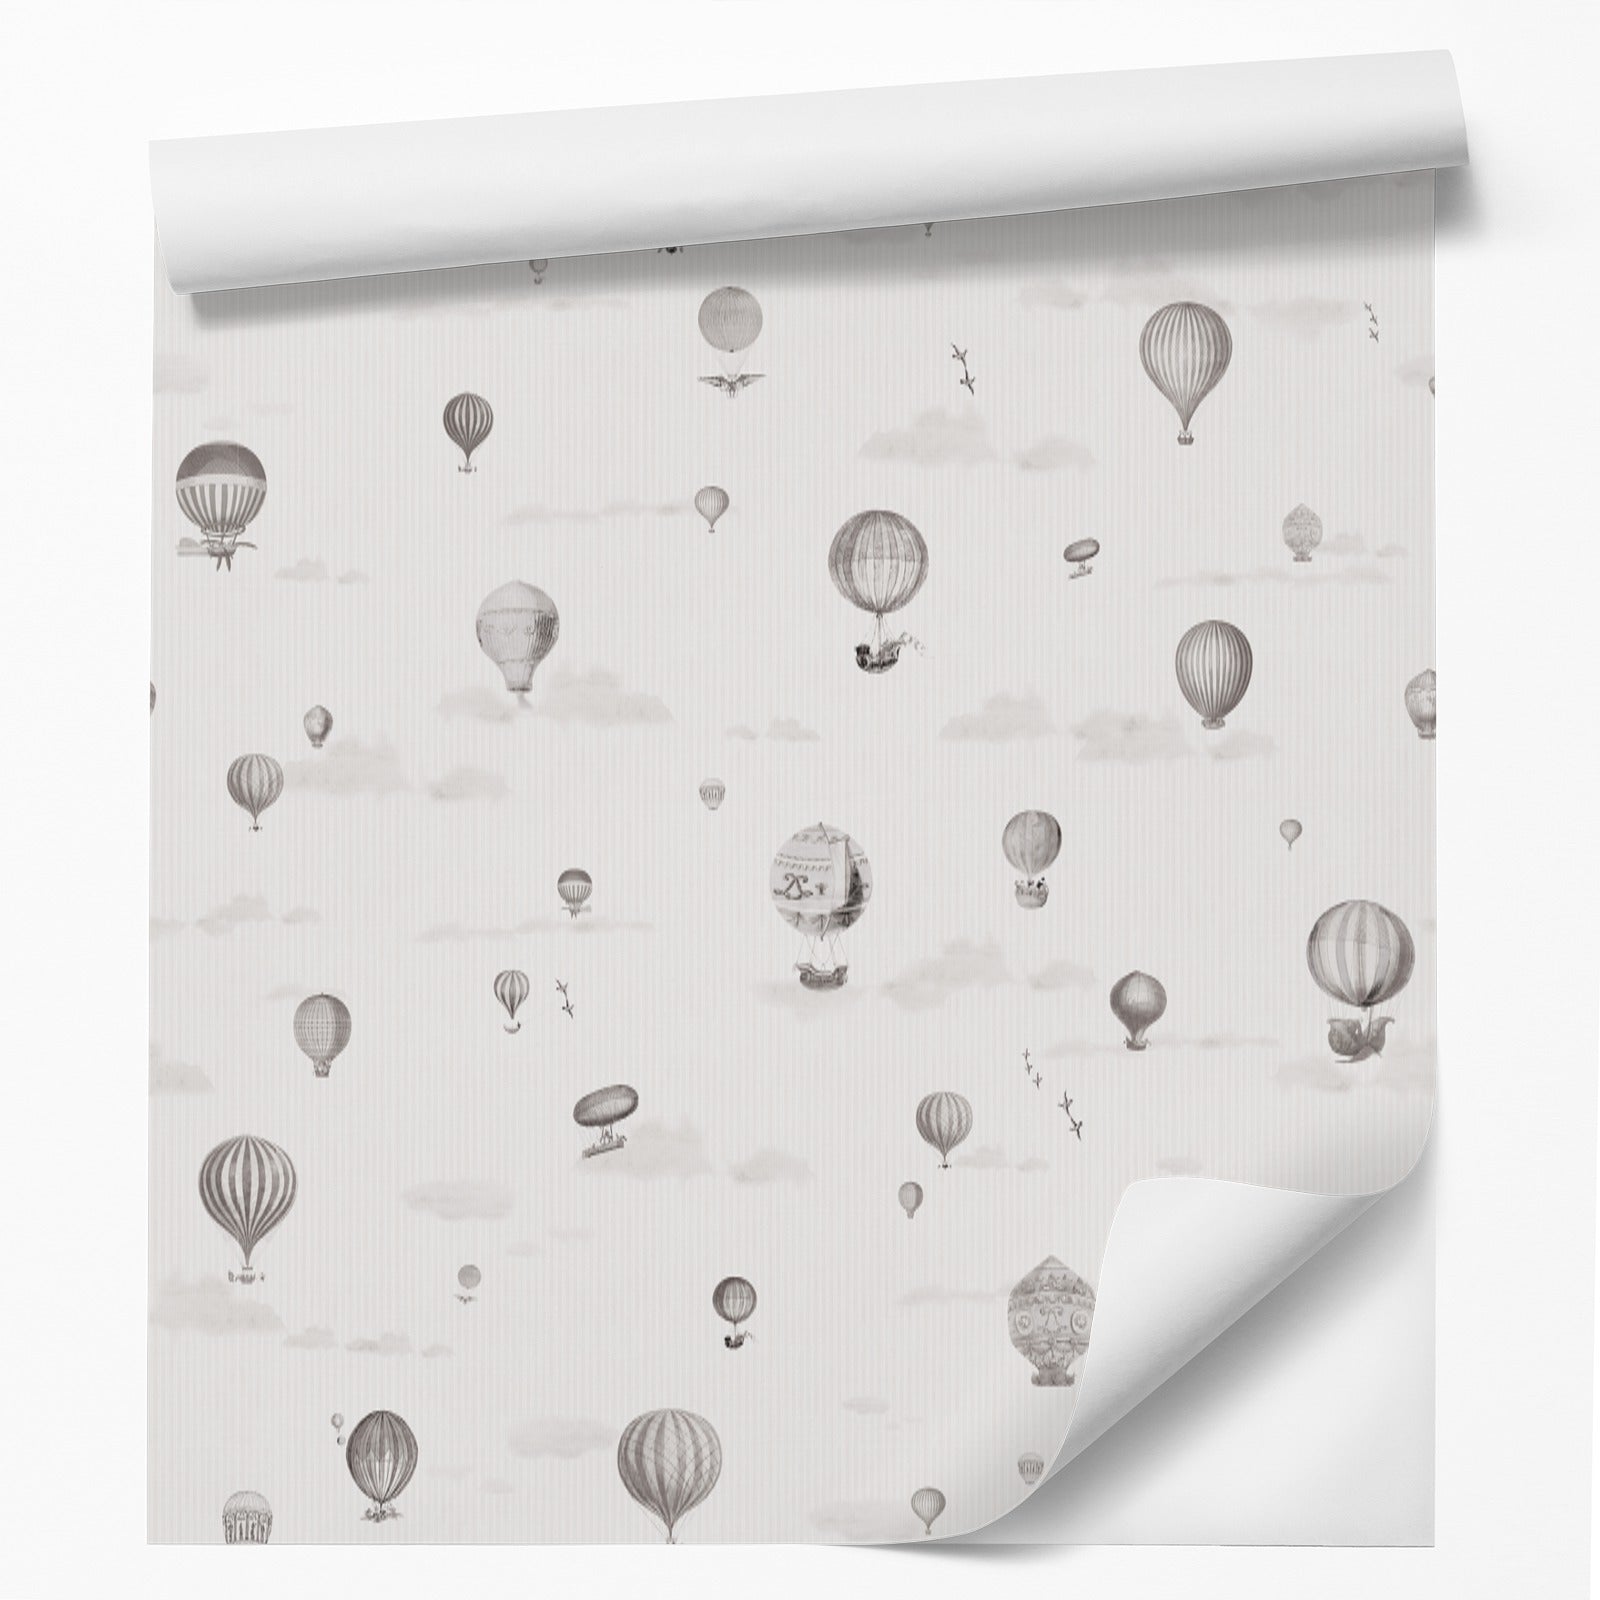 18' L x 24" W Peel & Stick Wallpaper Roll - Gray Hot Air Balloons by DecoWorks - Wallpaper - Americanflat